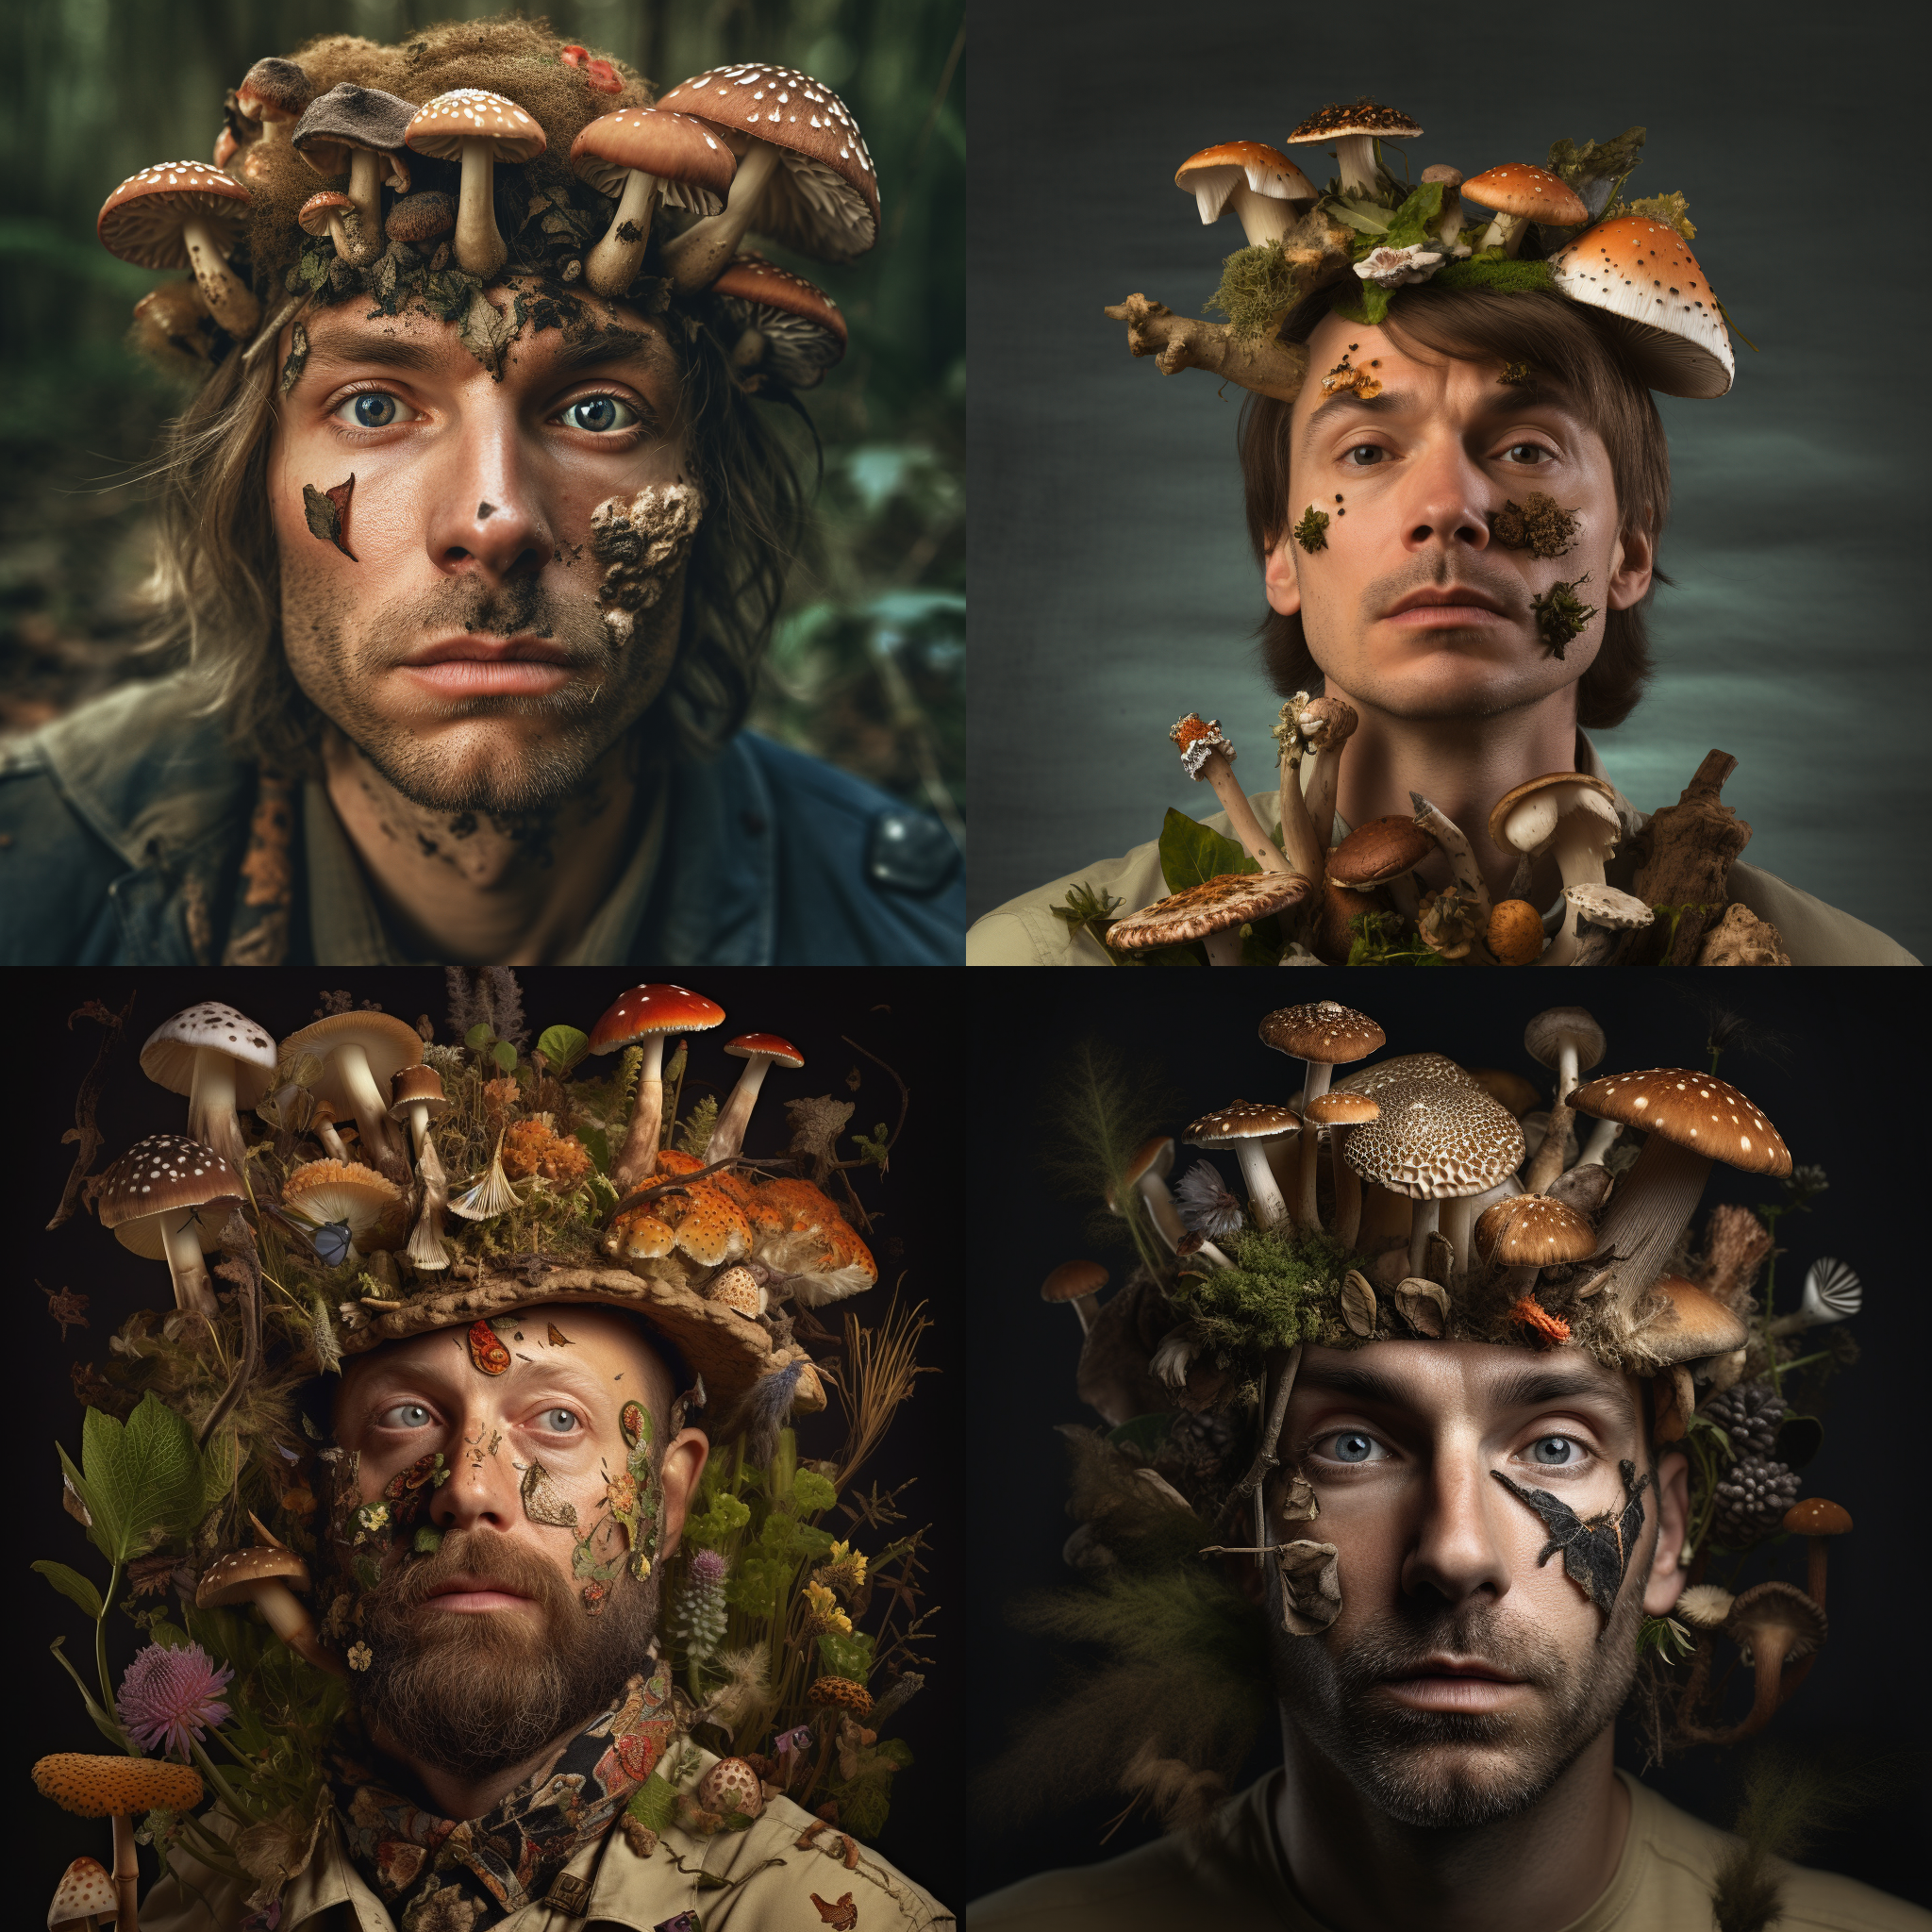 Four pictures of men with mushrooms on their heads.